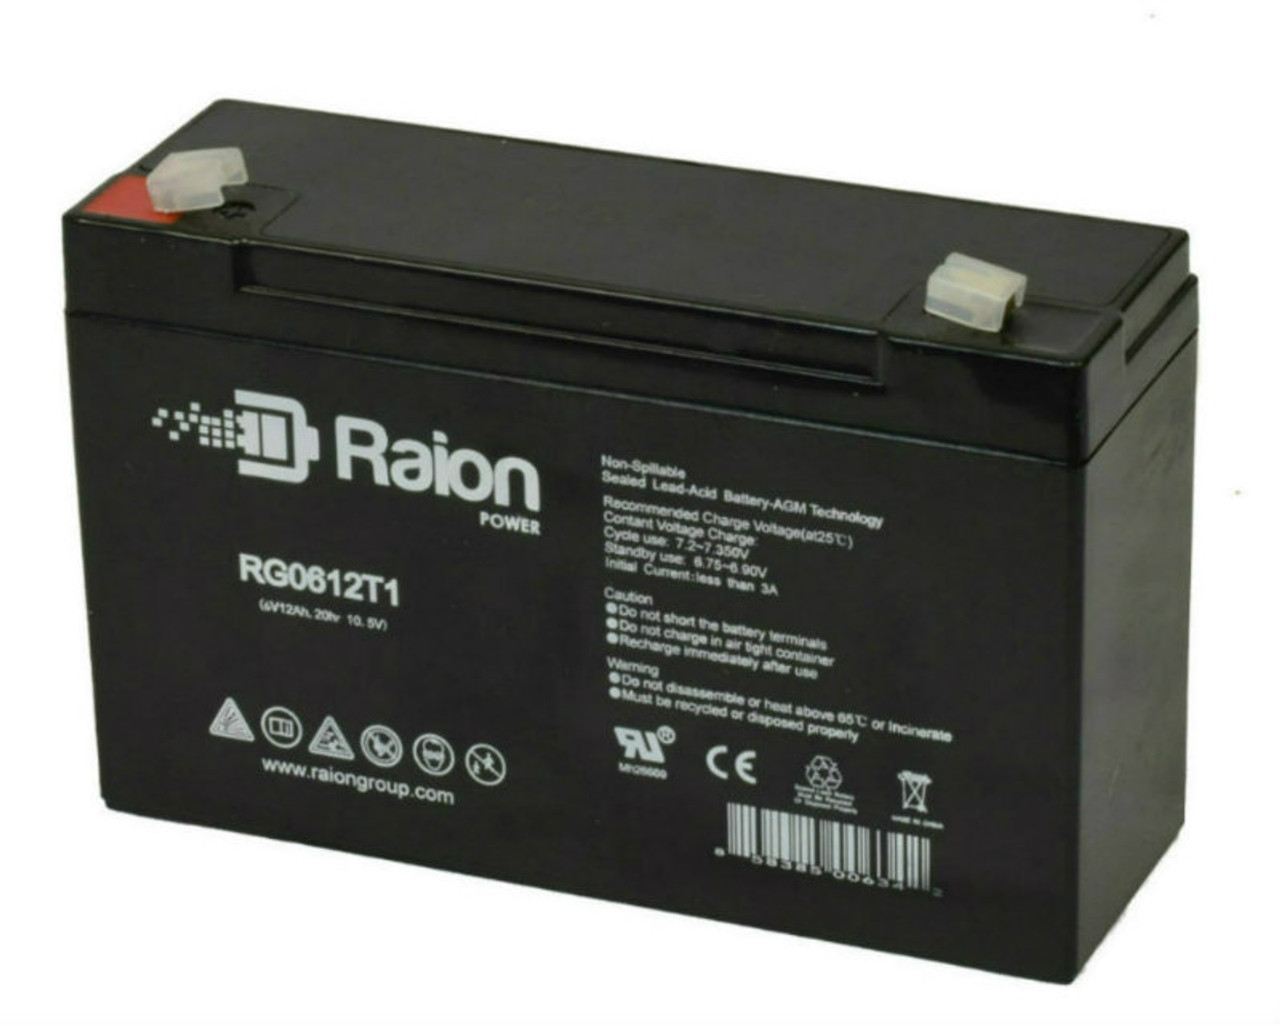 Raion Power RG06120T1 Replacement Battery for Narada 3-FM-10